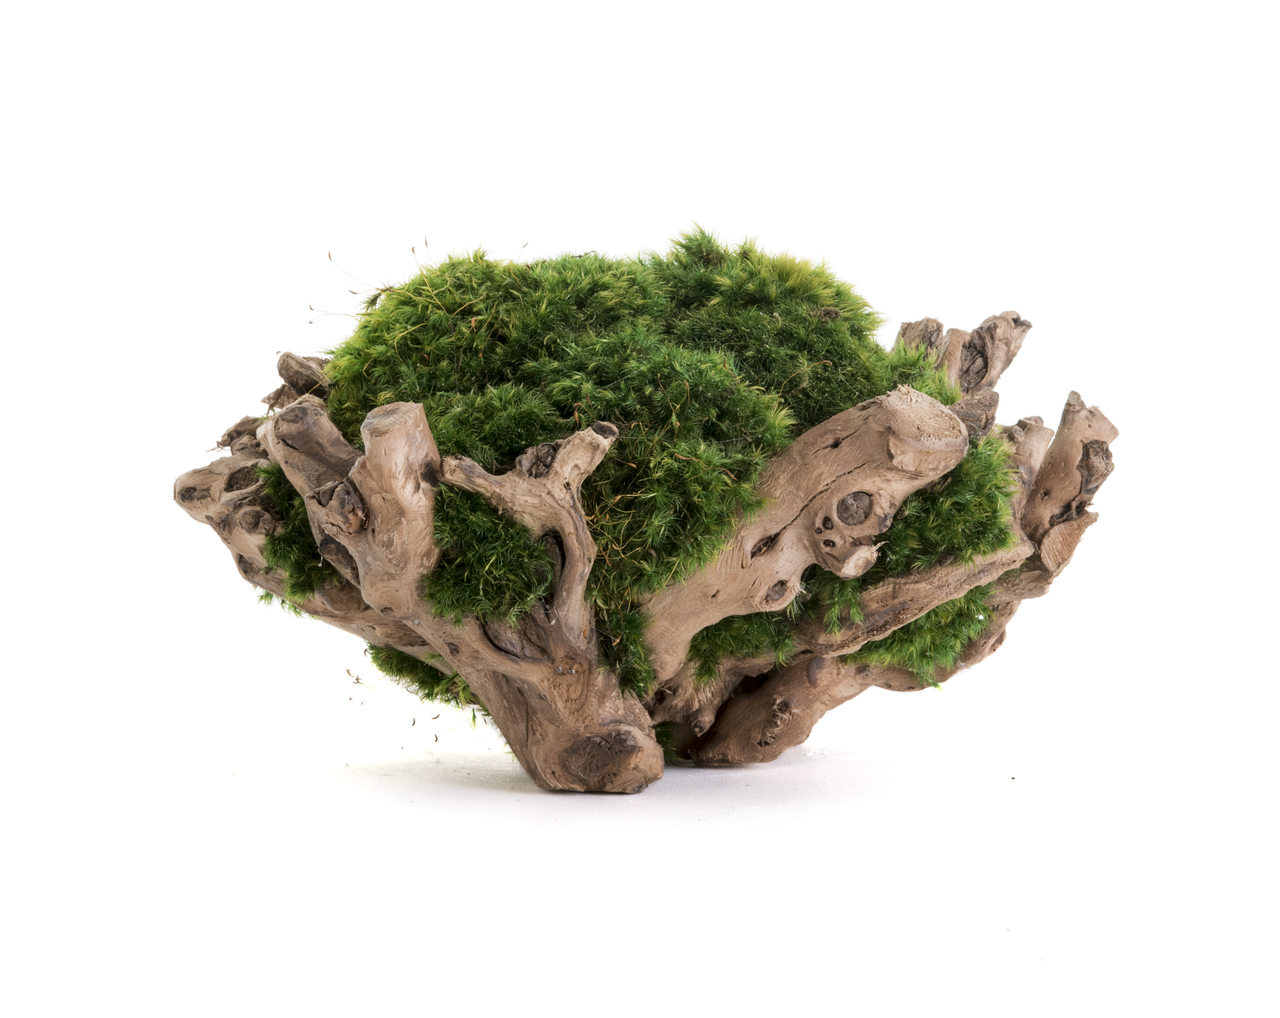 Natural Wood Pedestal Bowl with Moss (8" H x 18" W)